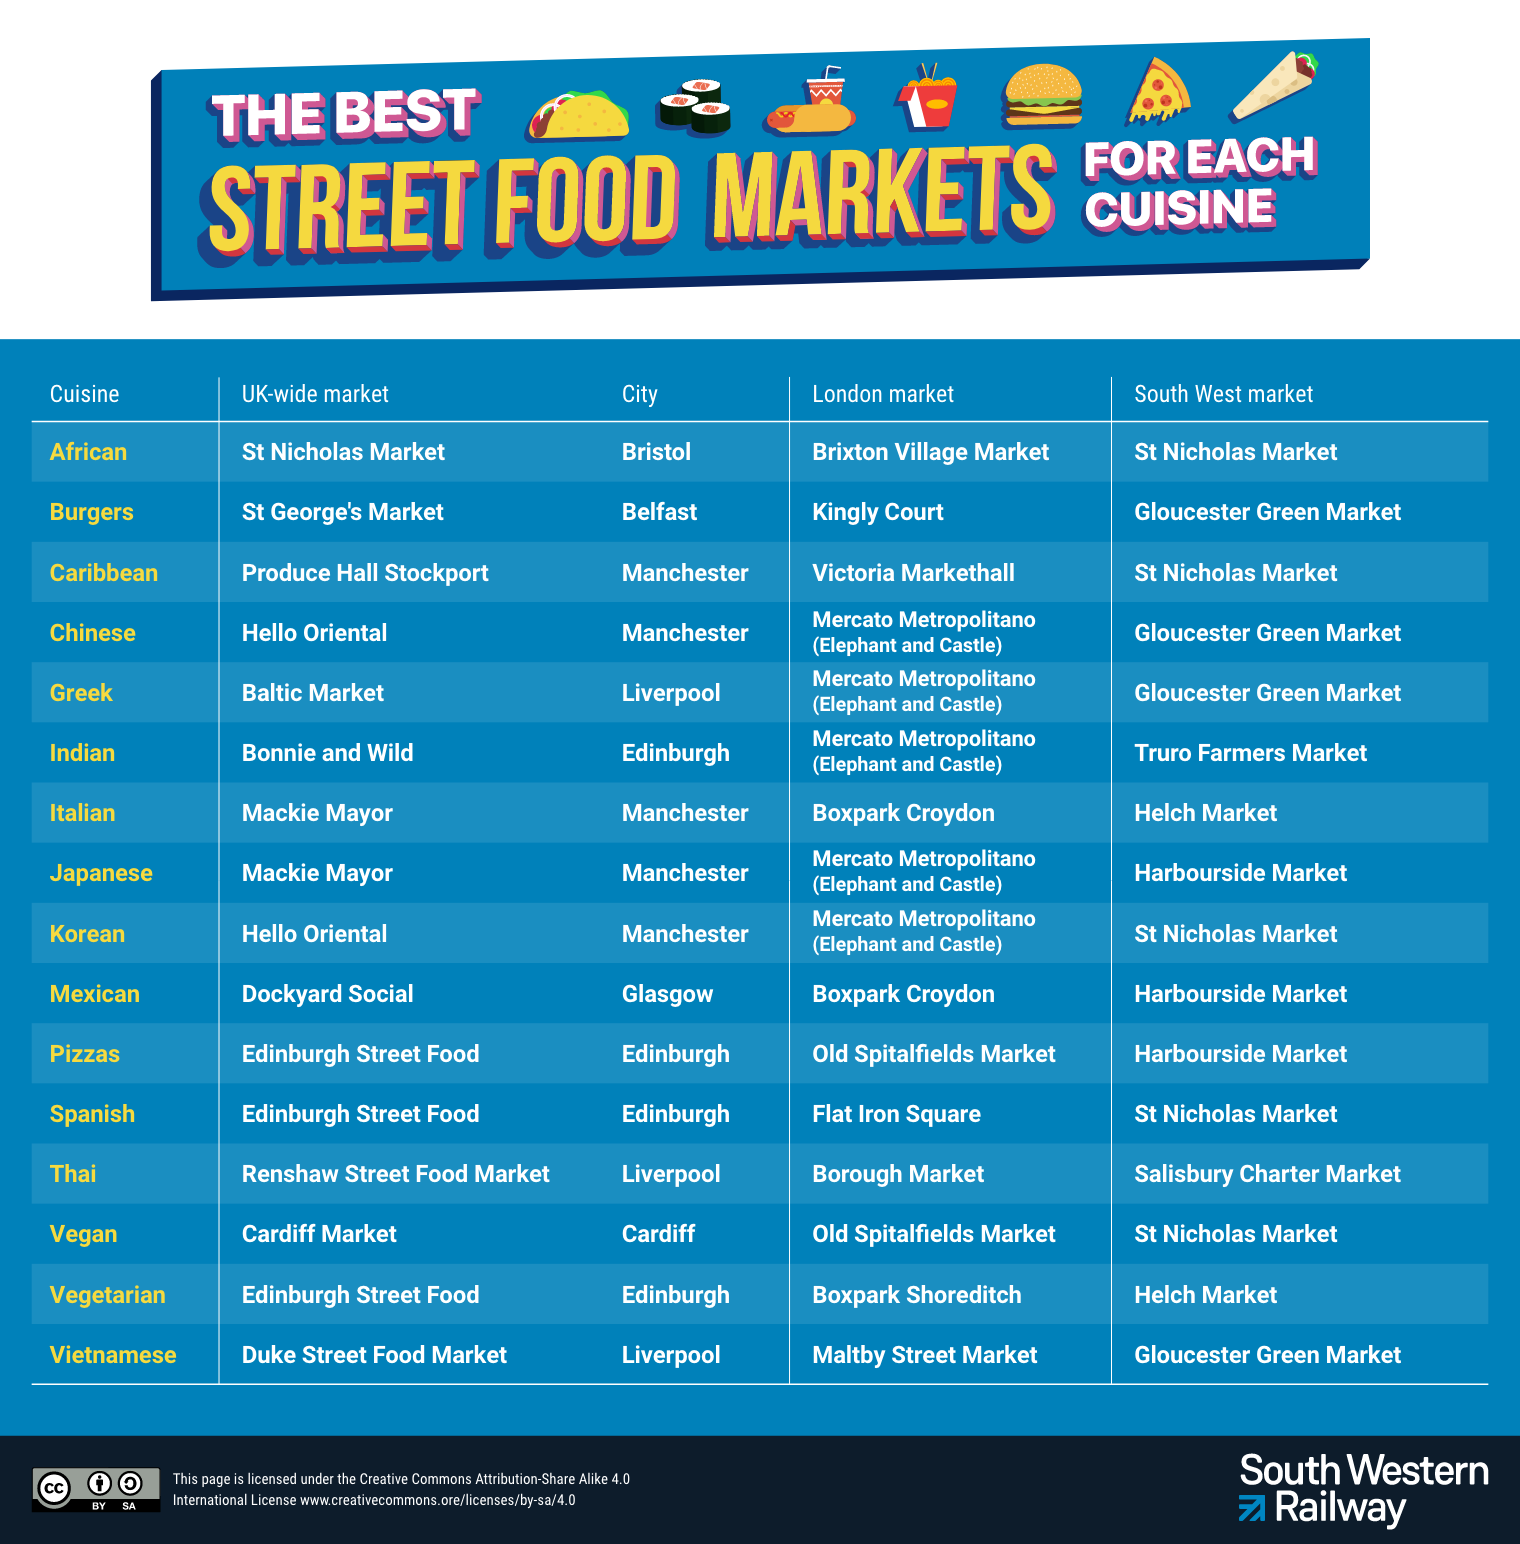 Map and list of the best streetfood markets by cuisine